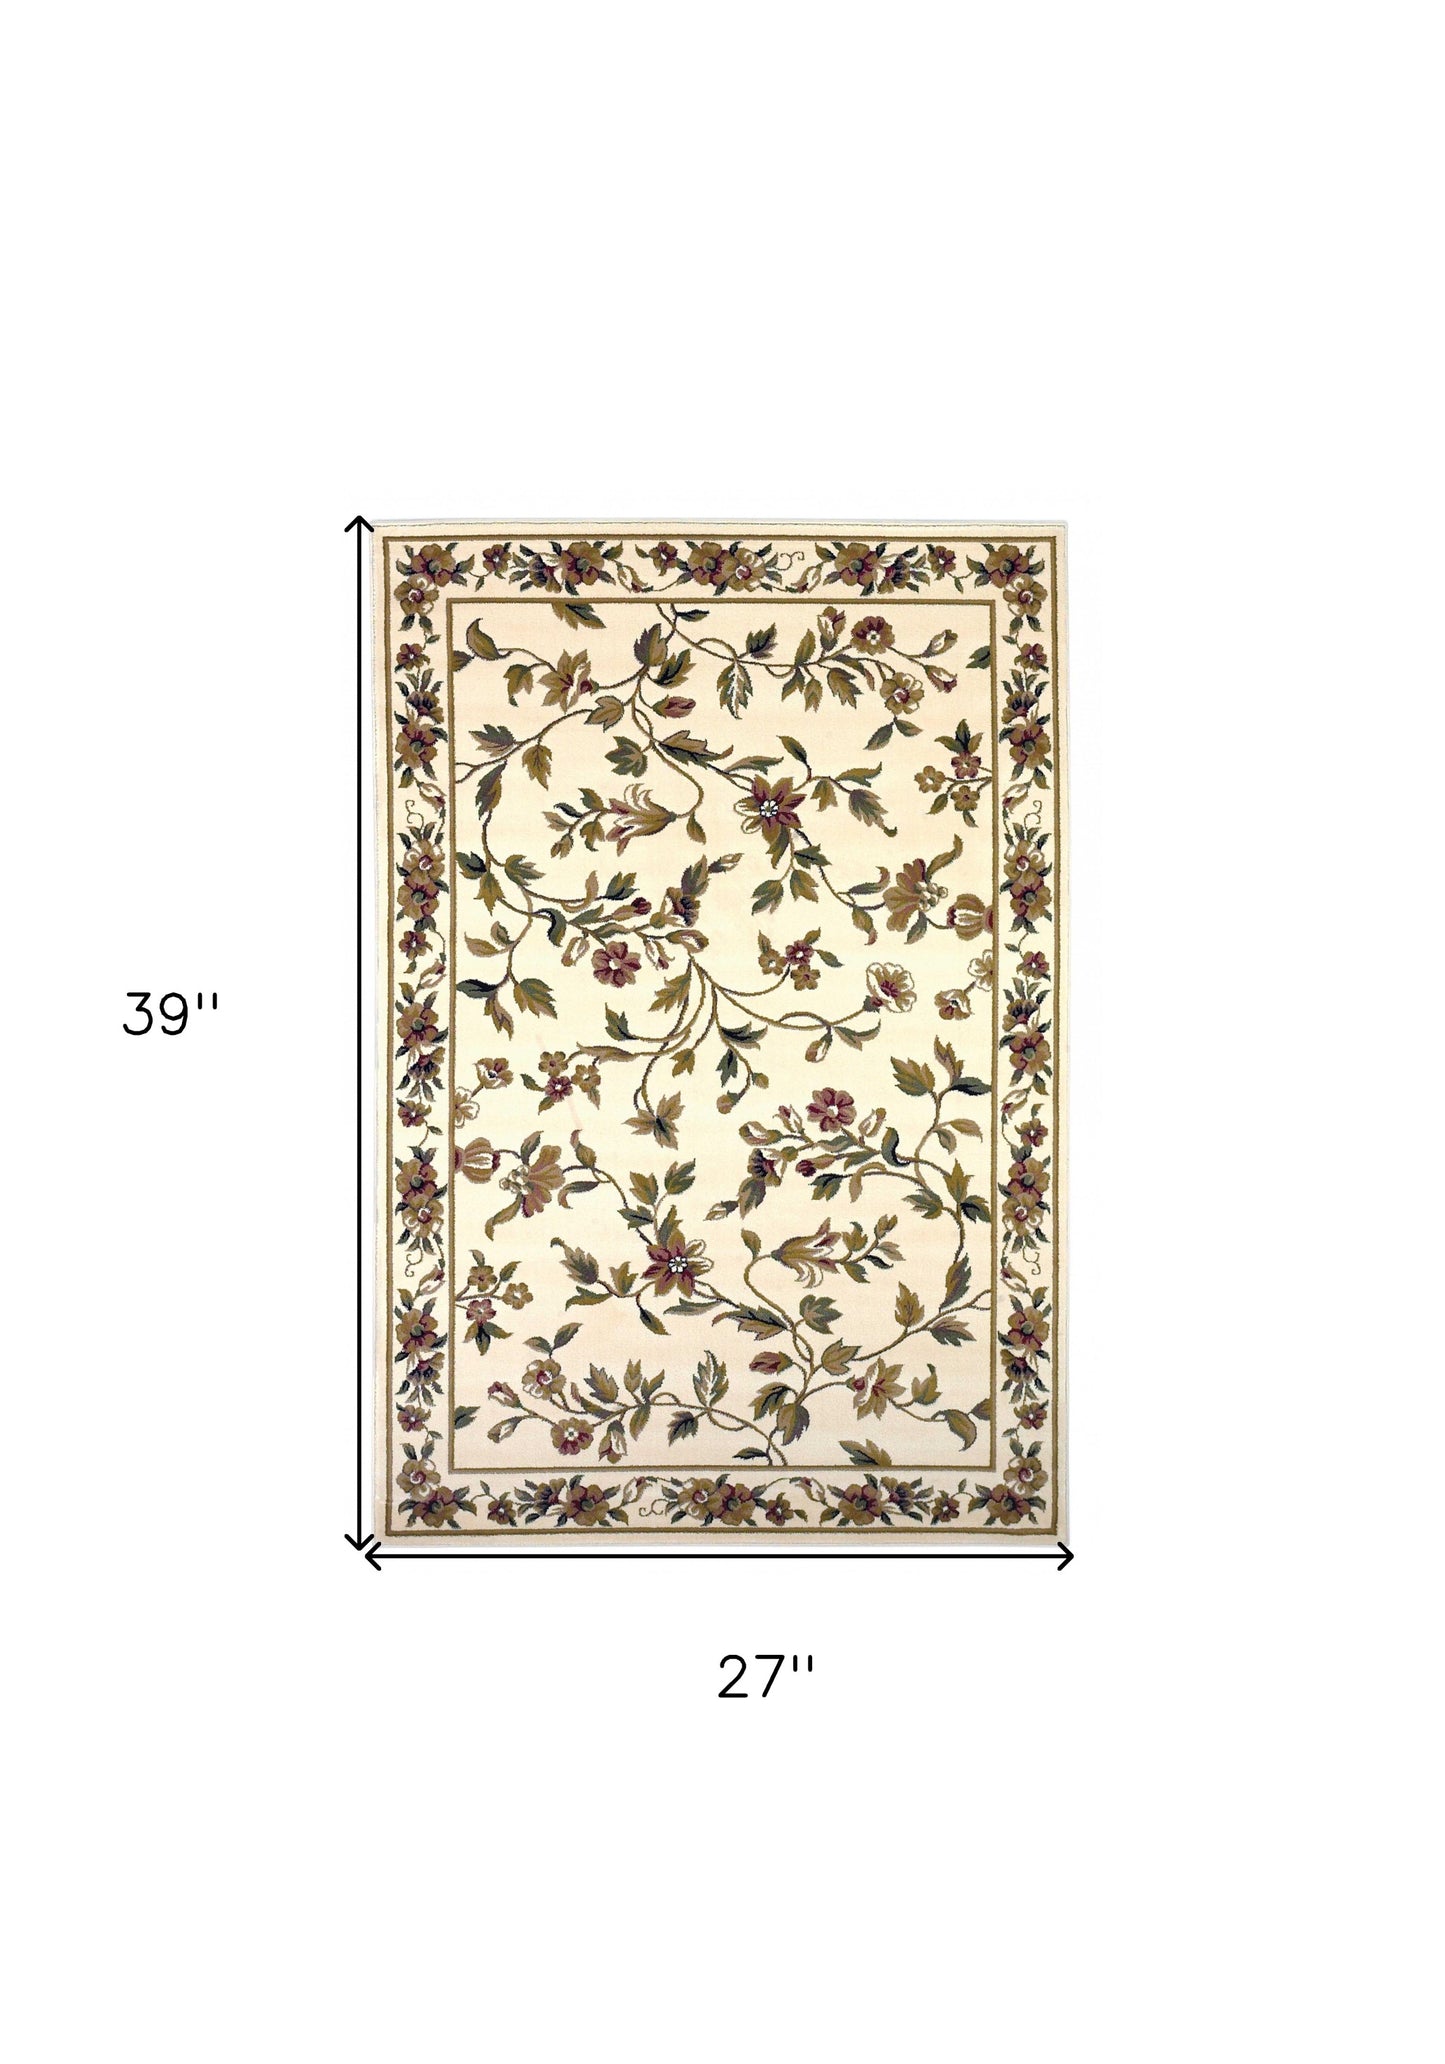 2'X3' Ivory Machine Woven Floral Vines Indoor Accent Rug